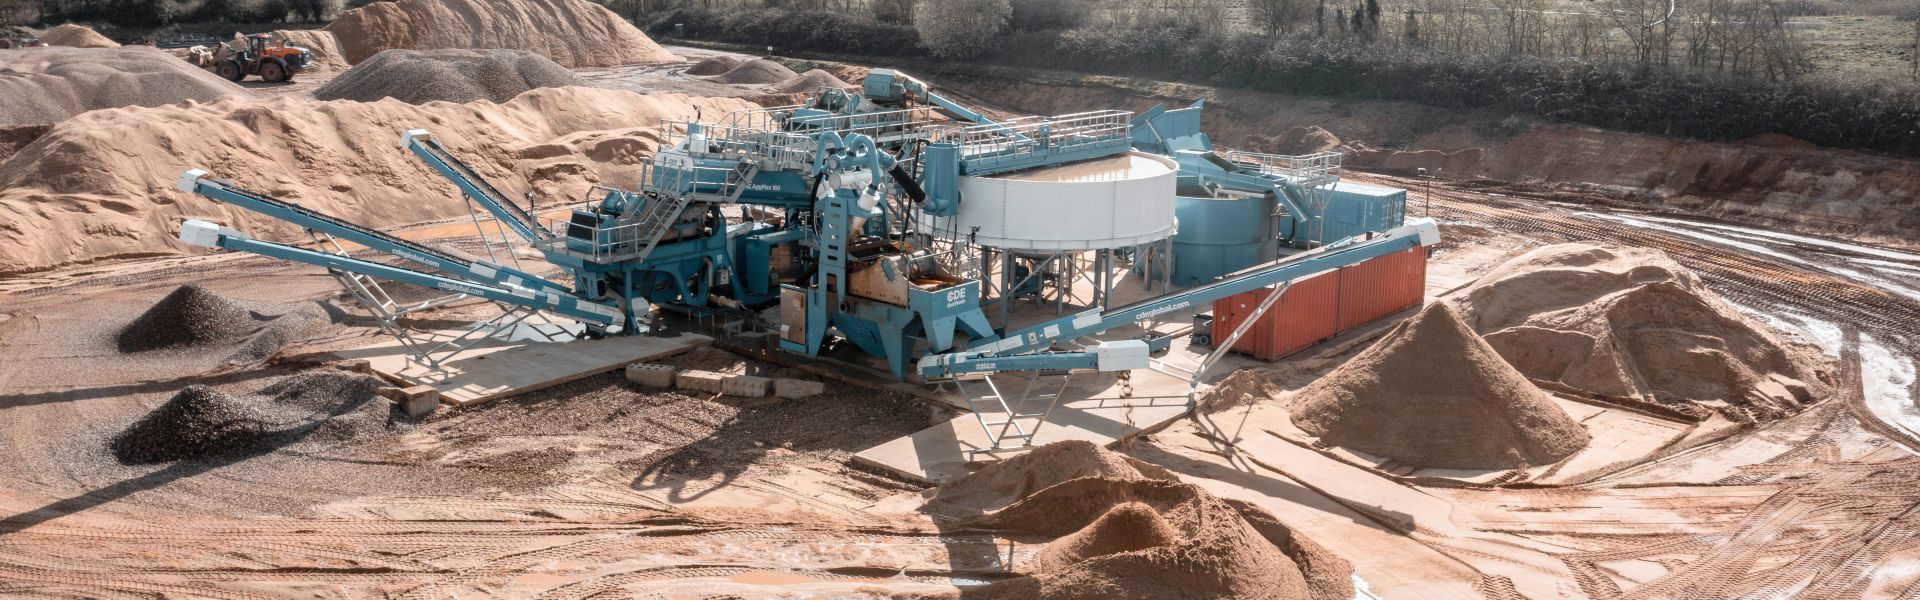 Mick George Group Invests in CDE Wash Plant